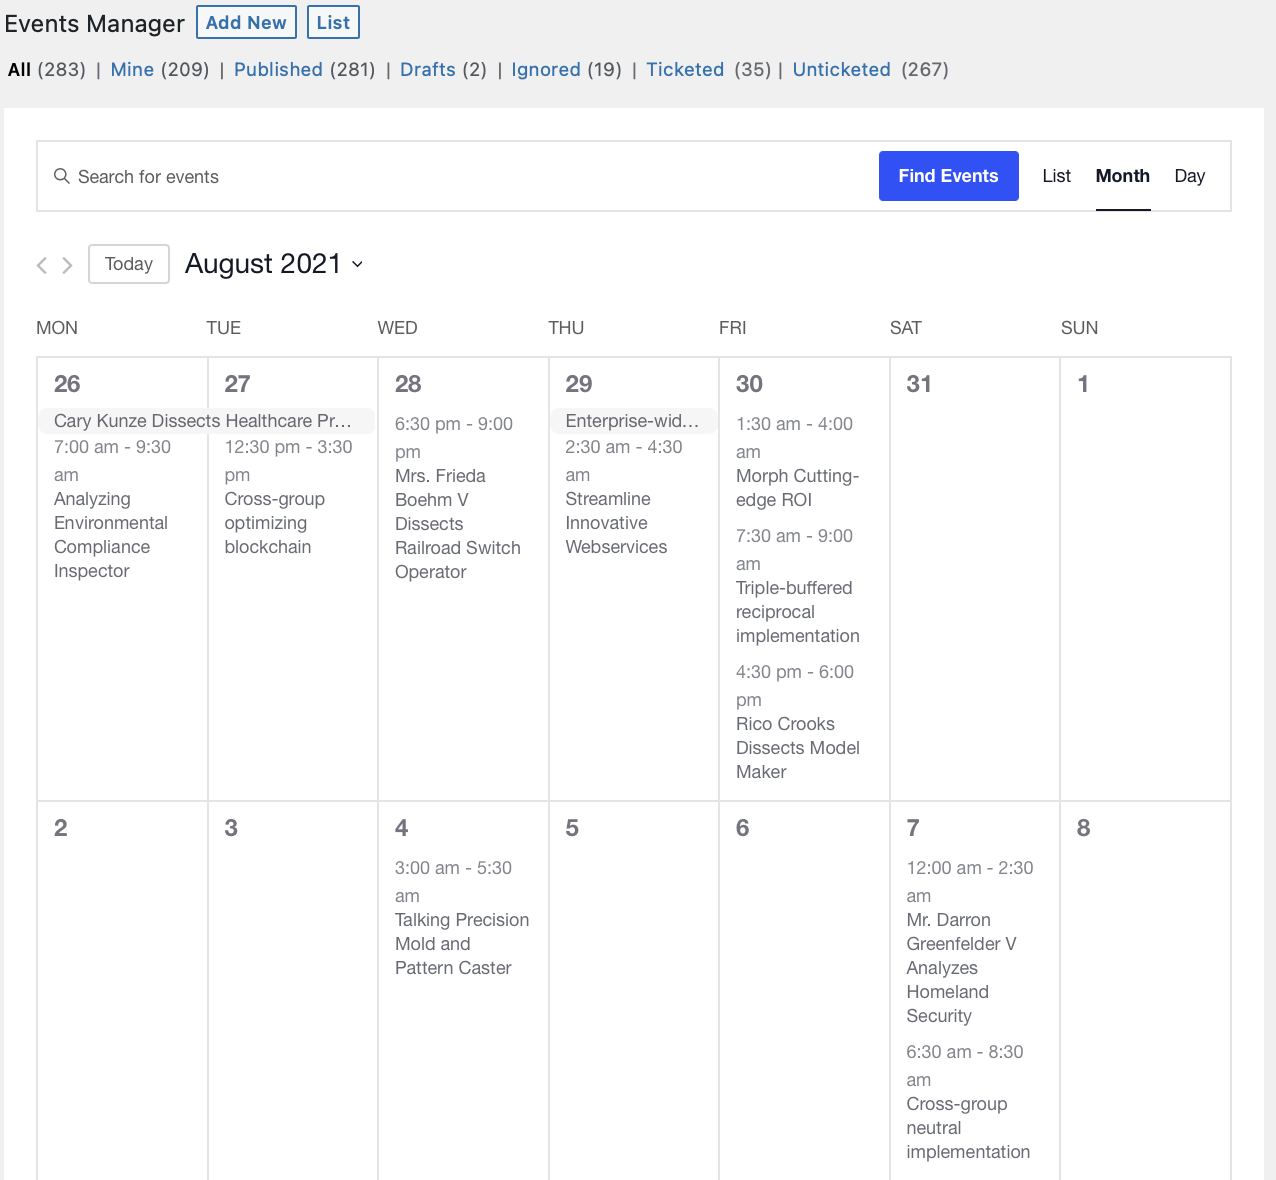 Events Manager in Month View